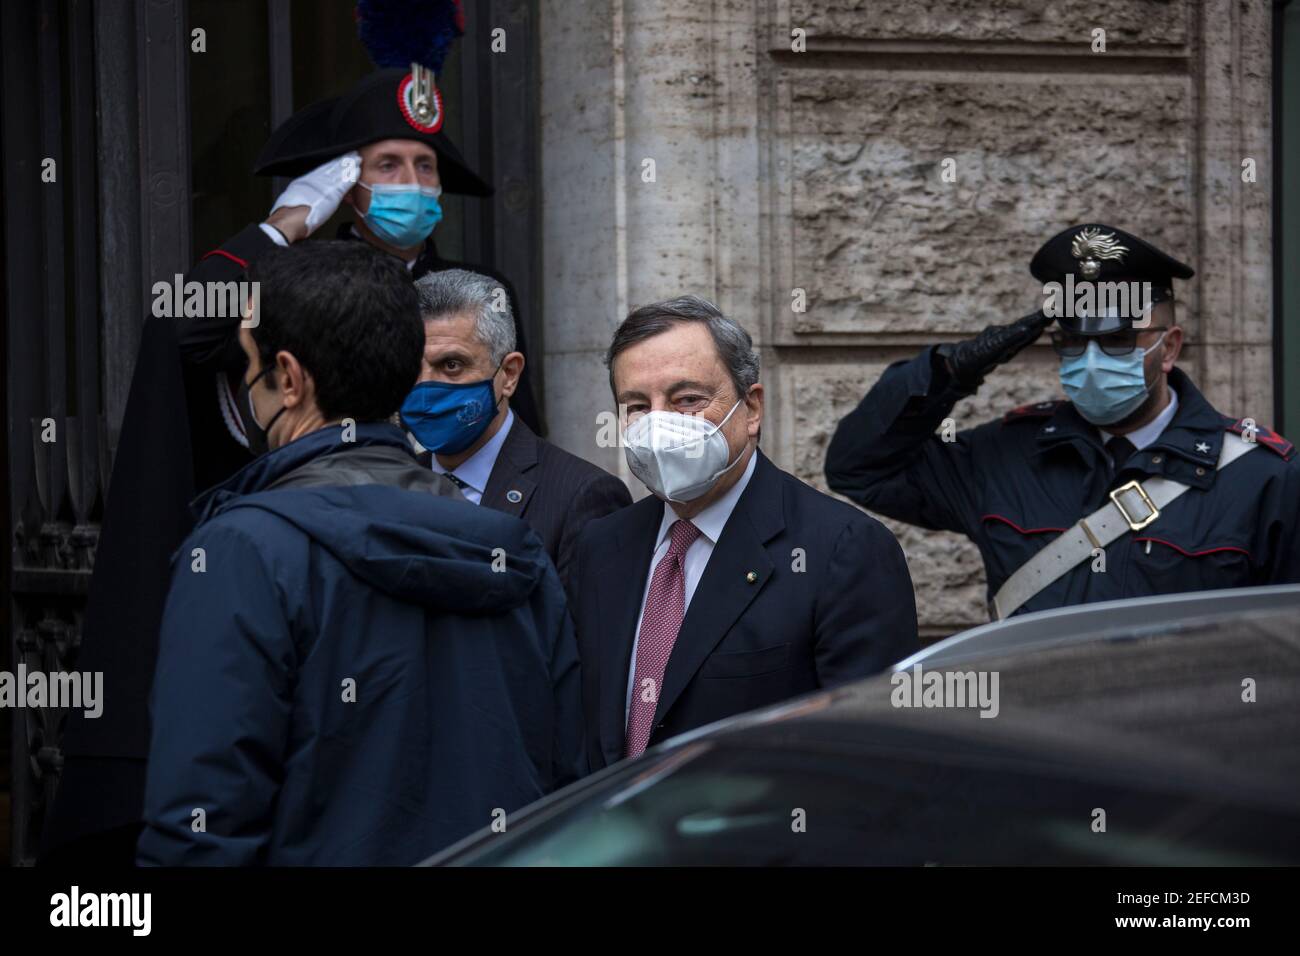 Rome, Italy. 17th Feb, 2021. The Italian Prime Minister and former President of the European Central Bank, BCE, Professor Mario Draghi, arrives at the Senate of the Italian Republic asking the Senators the vote of confidence (Voto di fiducia) for the new Italian Government. Credit: LSF Photo/Alamy Live News Stock Photo